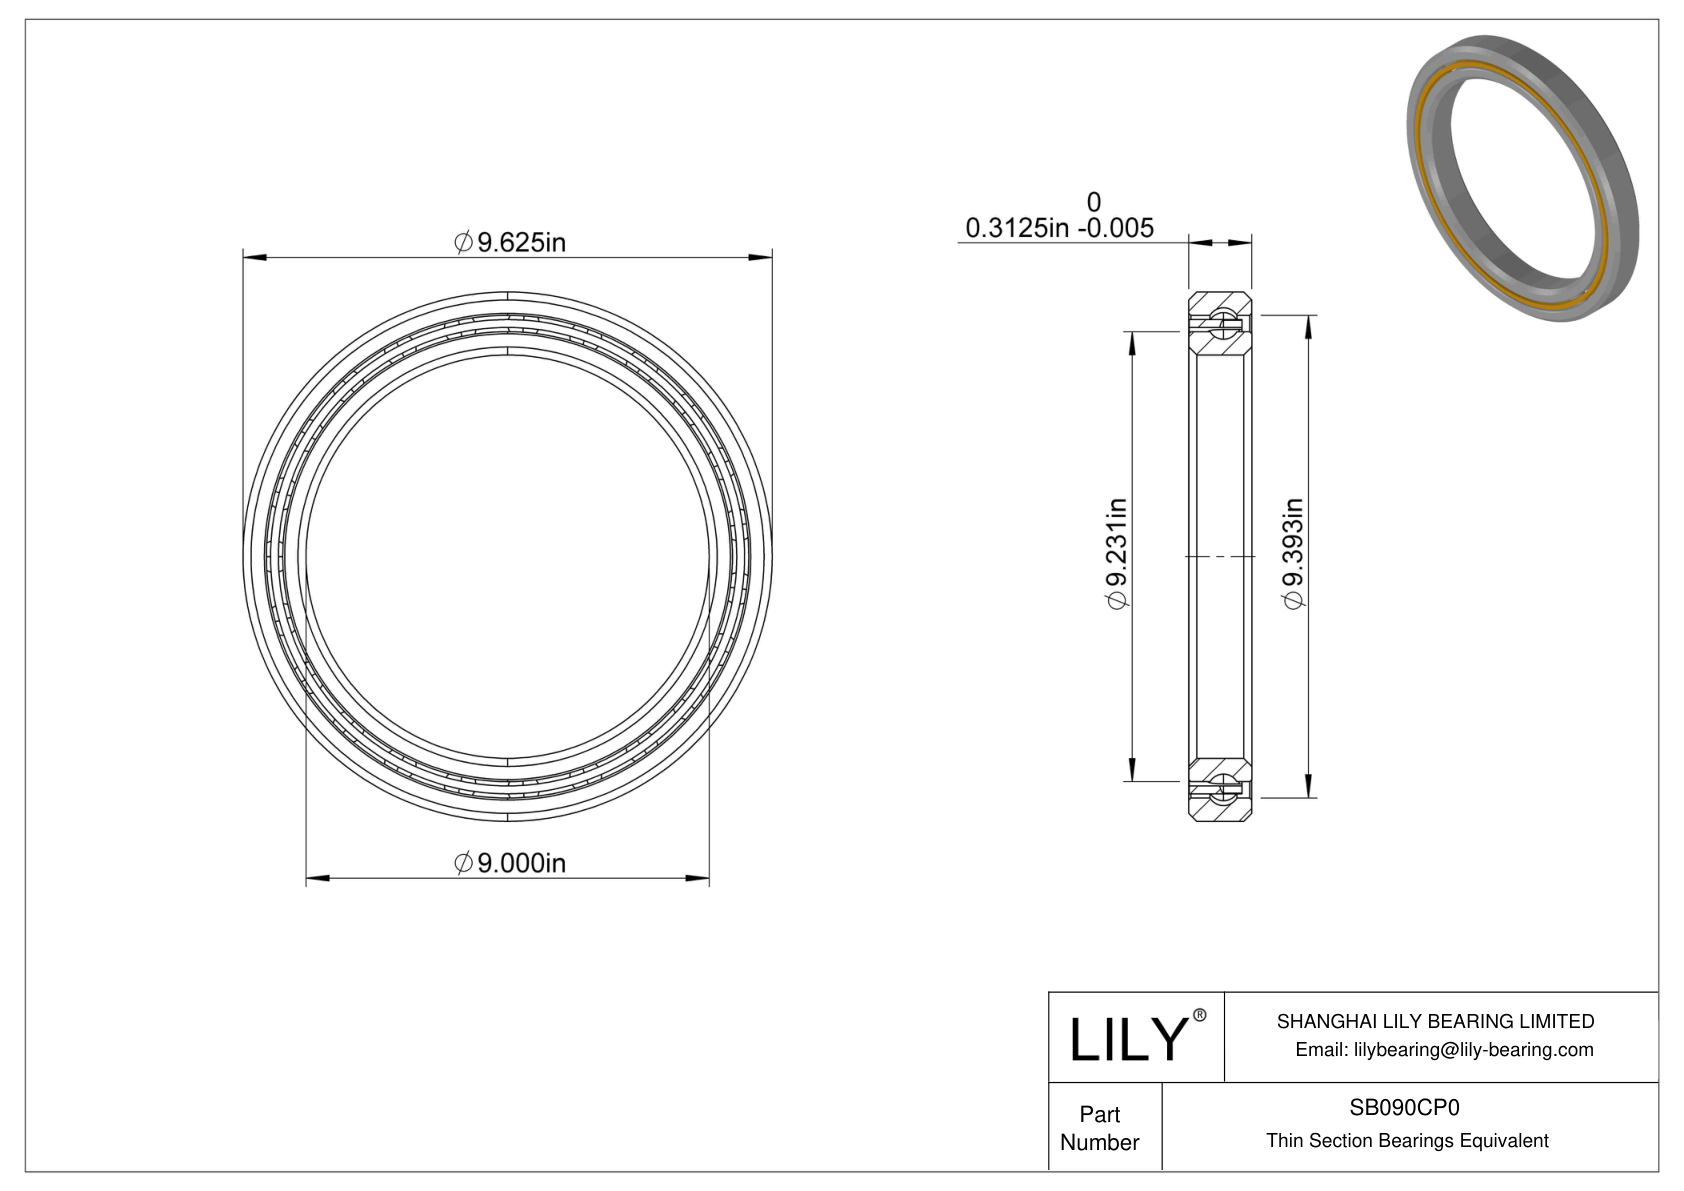 SB090CP0 Constant Section (CS) Bearings cad drawing